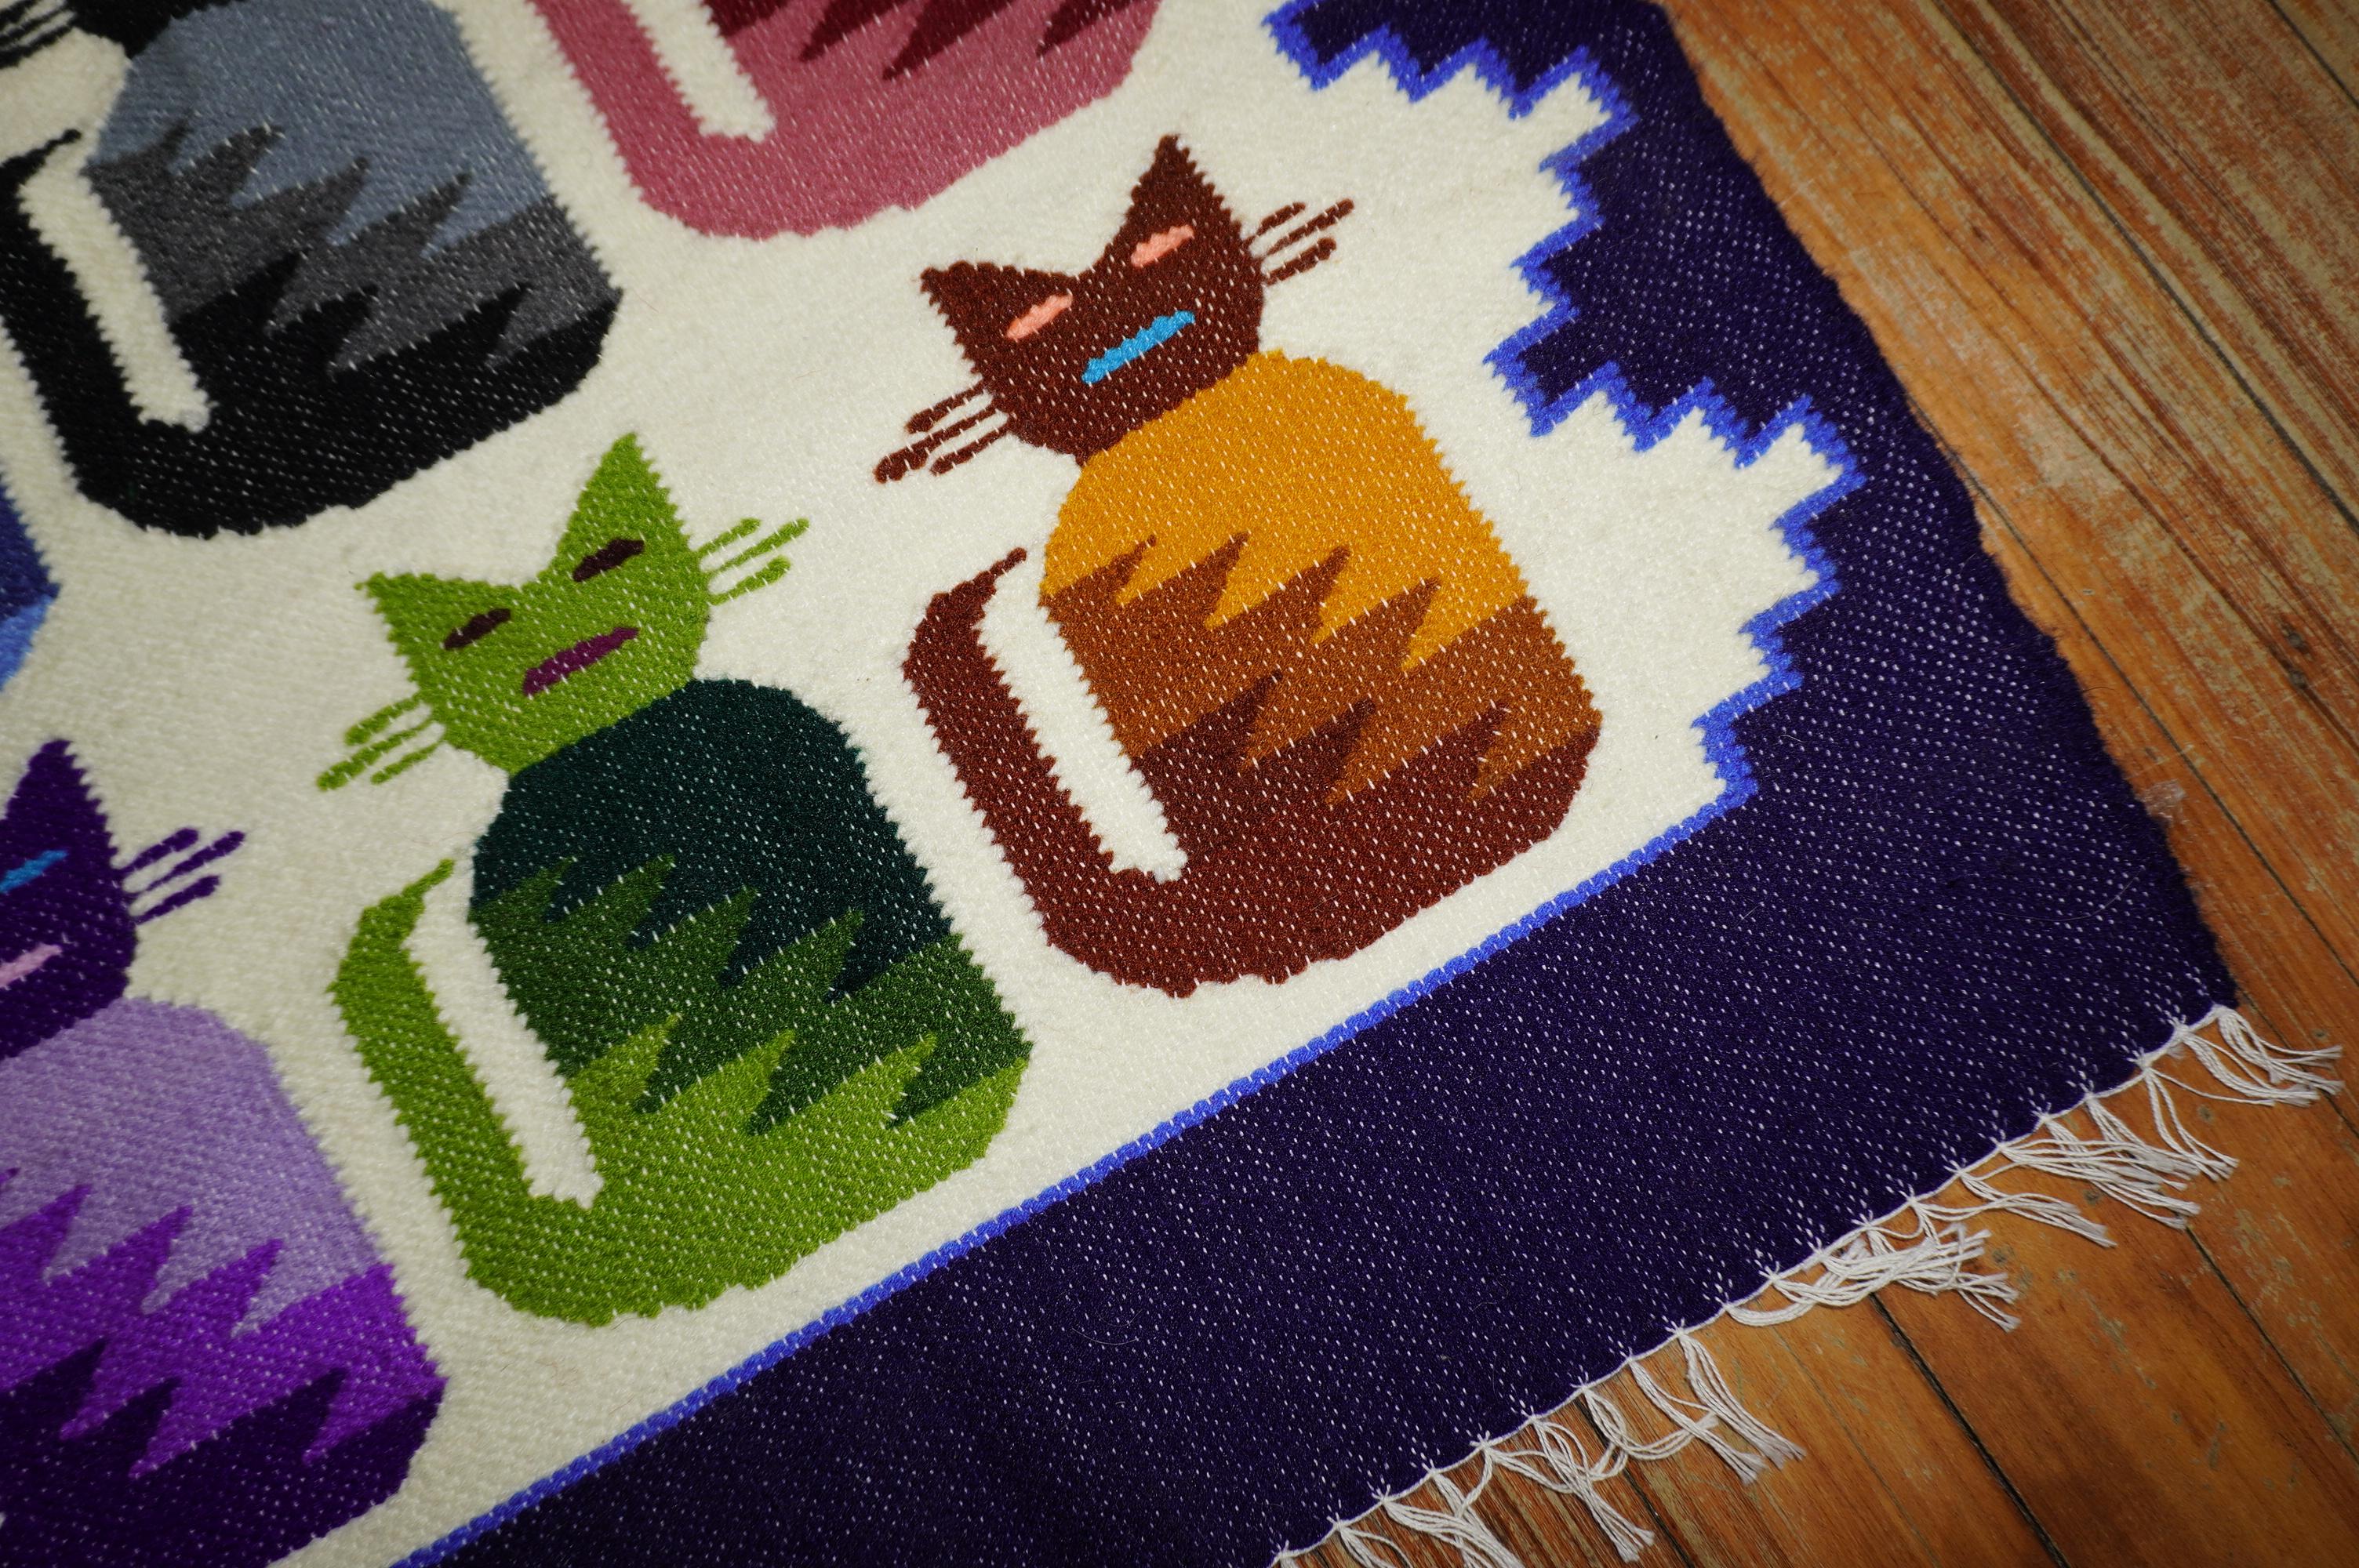 A cute Mexican textile from the late 20th century with 9 different kittens.

Measures: 1'9